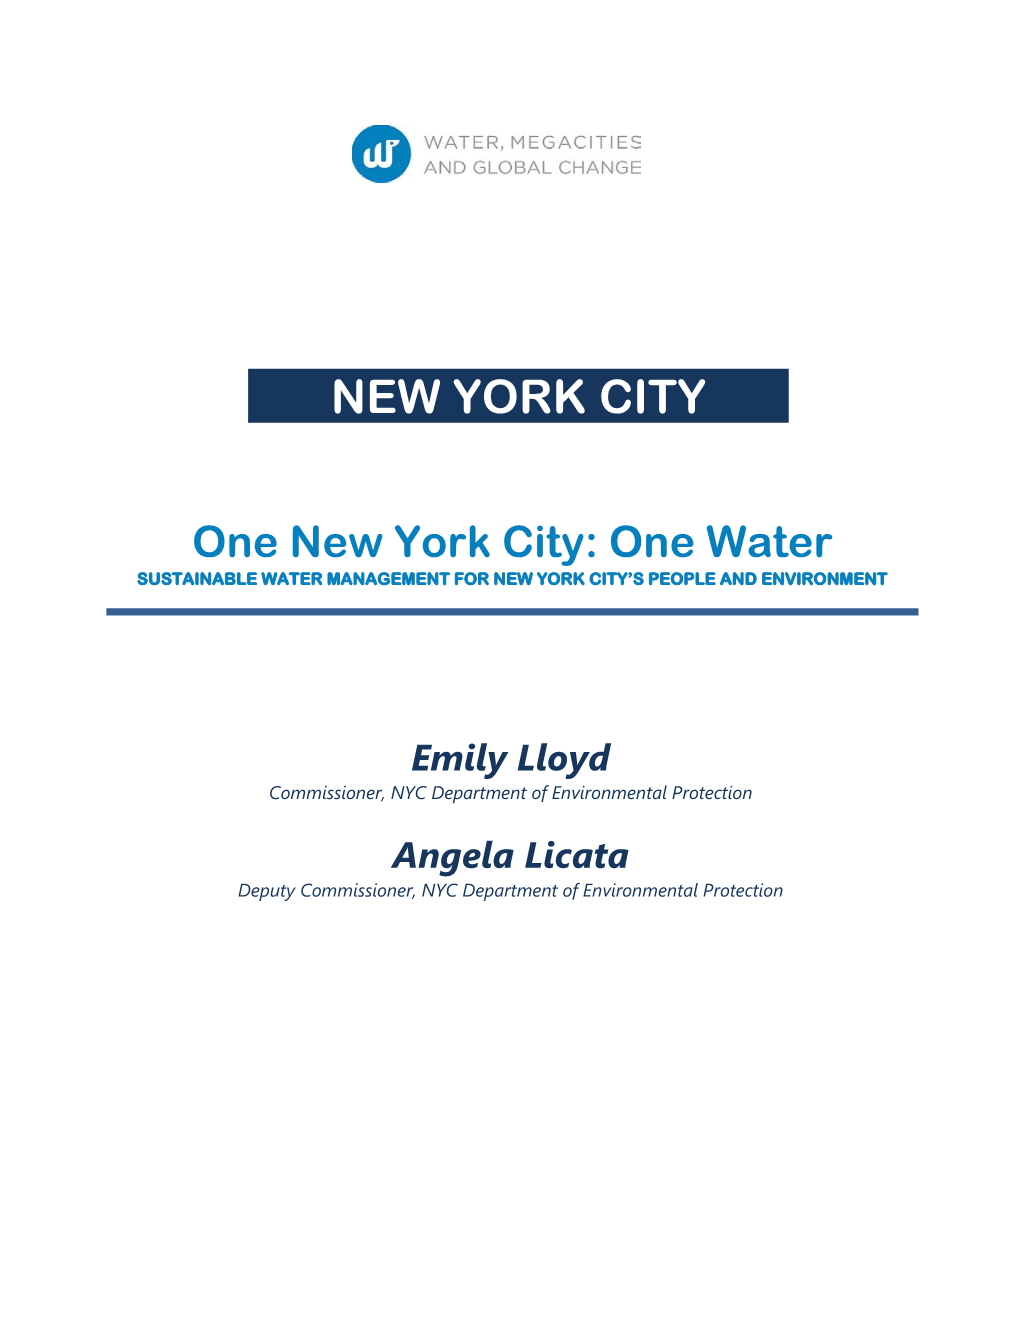 One New York City: One Water SUSTAINABLE WATER MANAGEMENT for NEW YORK CITY’S PEOPLE and ENVIRONMENT